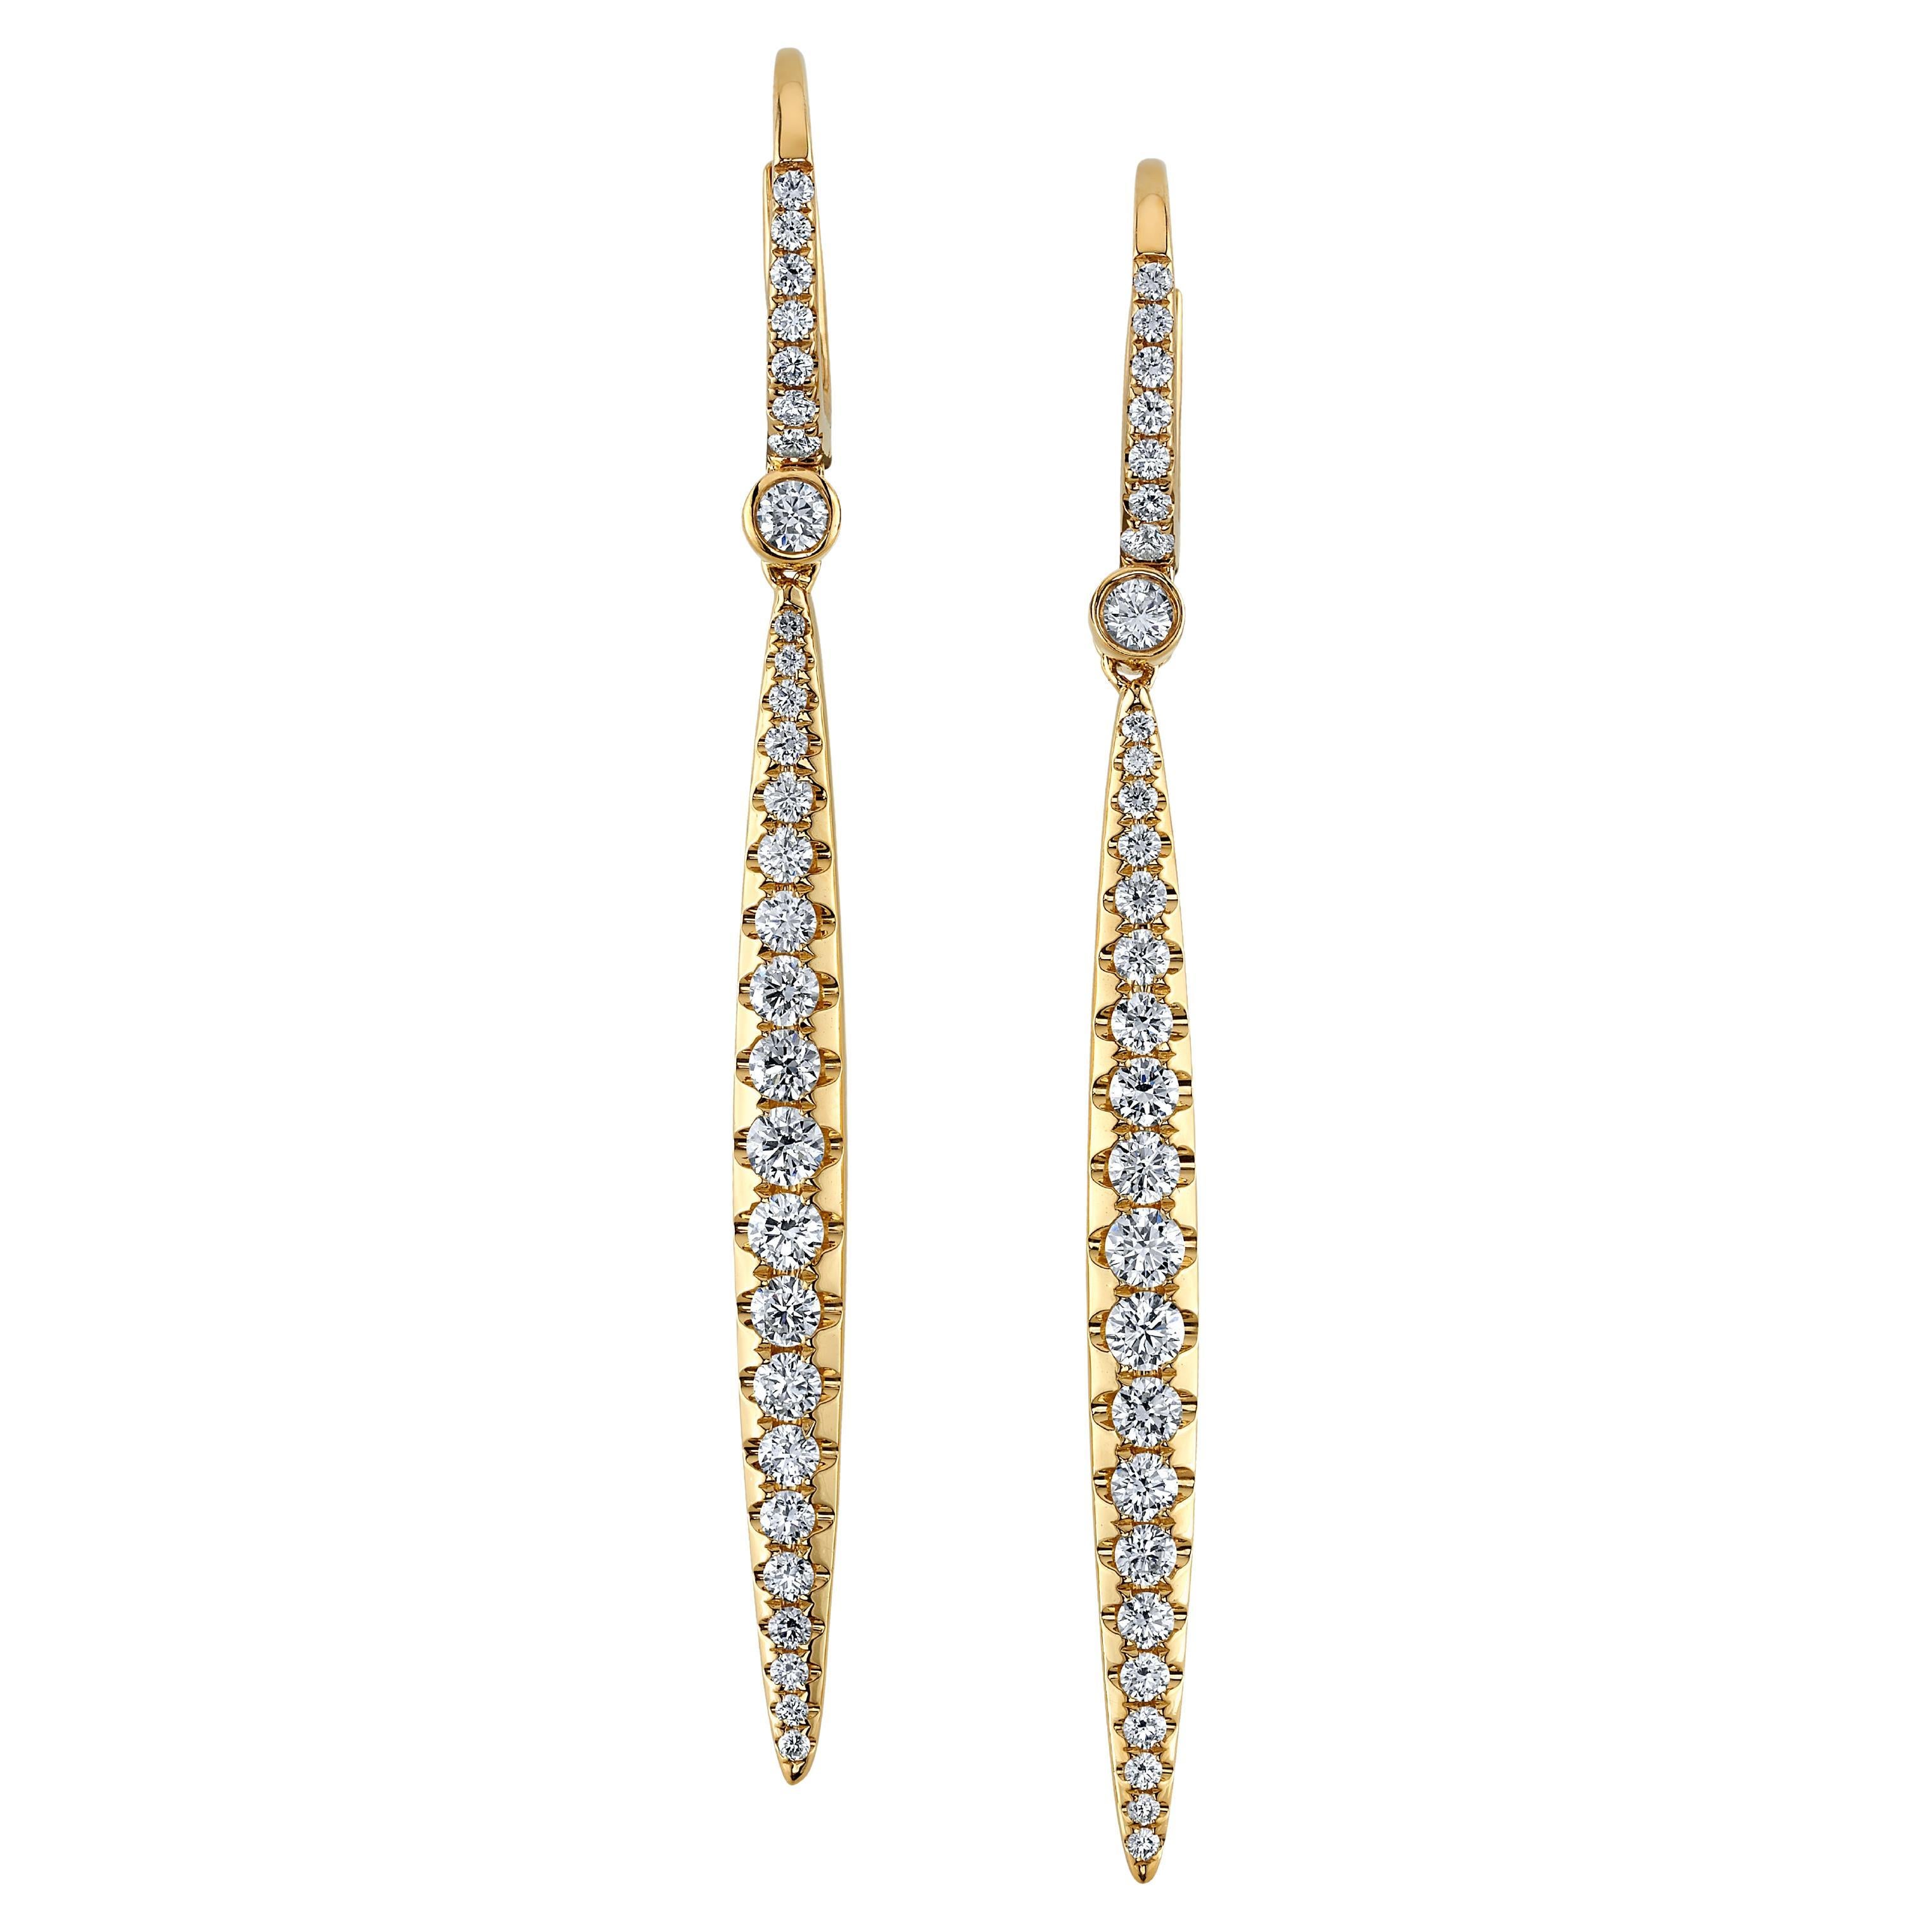 Diamond Pave Linear Dangling Earrings in Yellow Gold, 1.31 Carats Total 